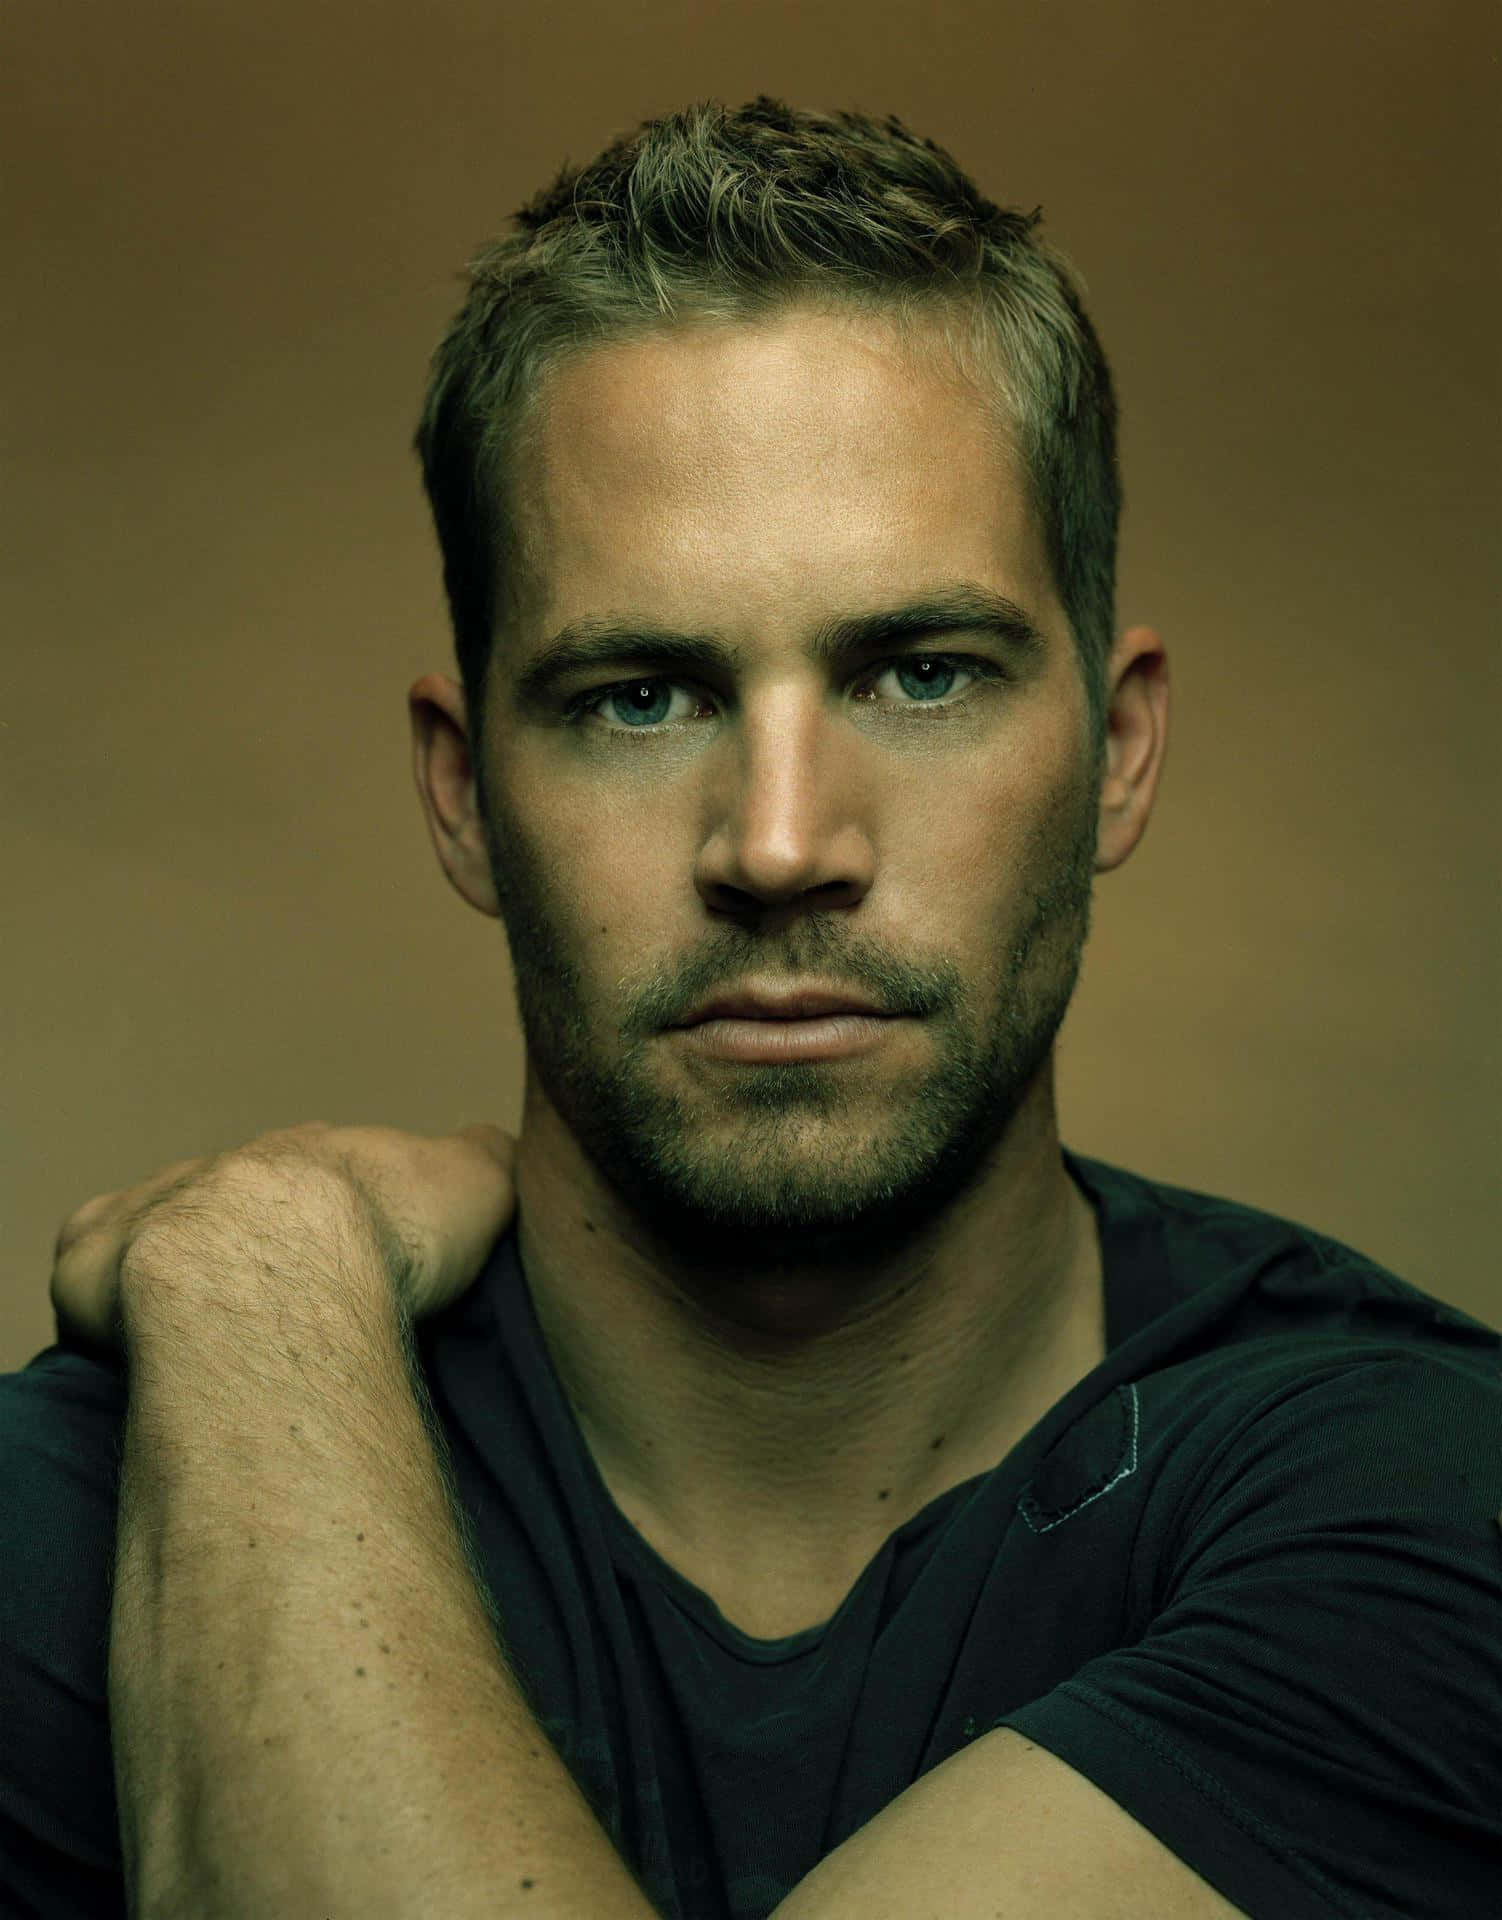 Actor Paul Walker promoting 'Fast and Furious'